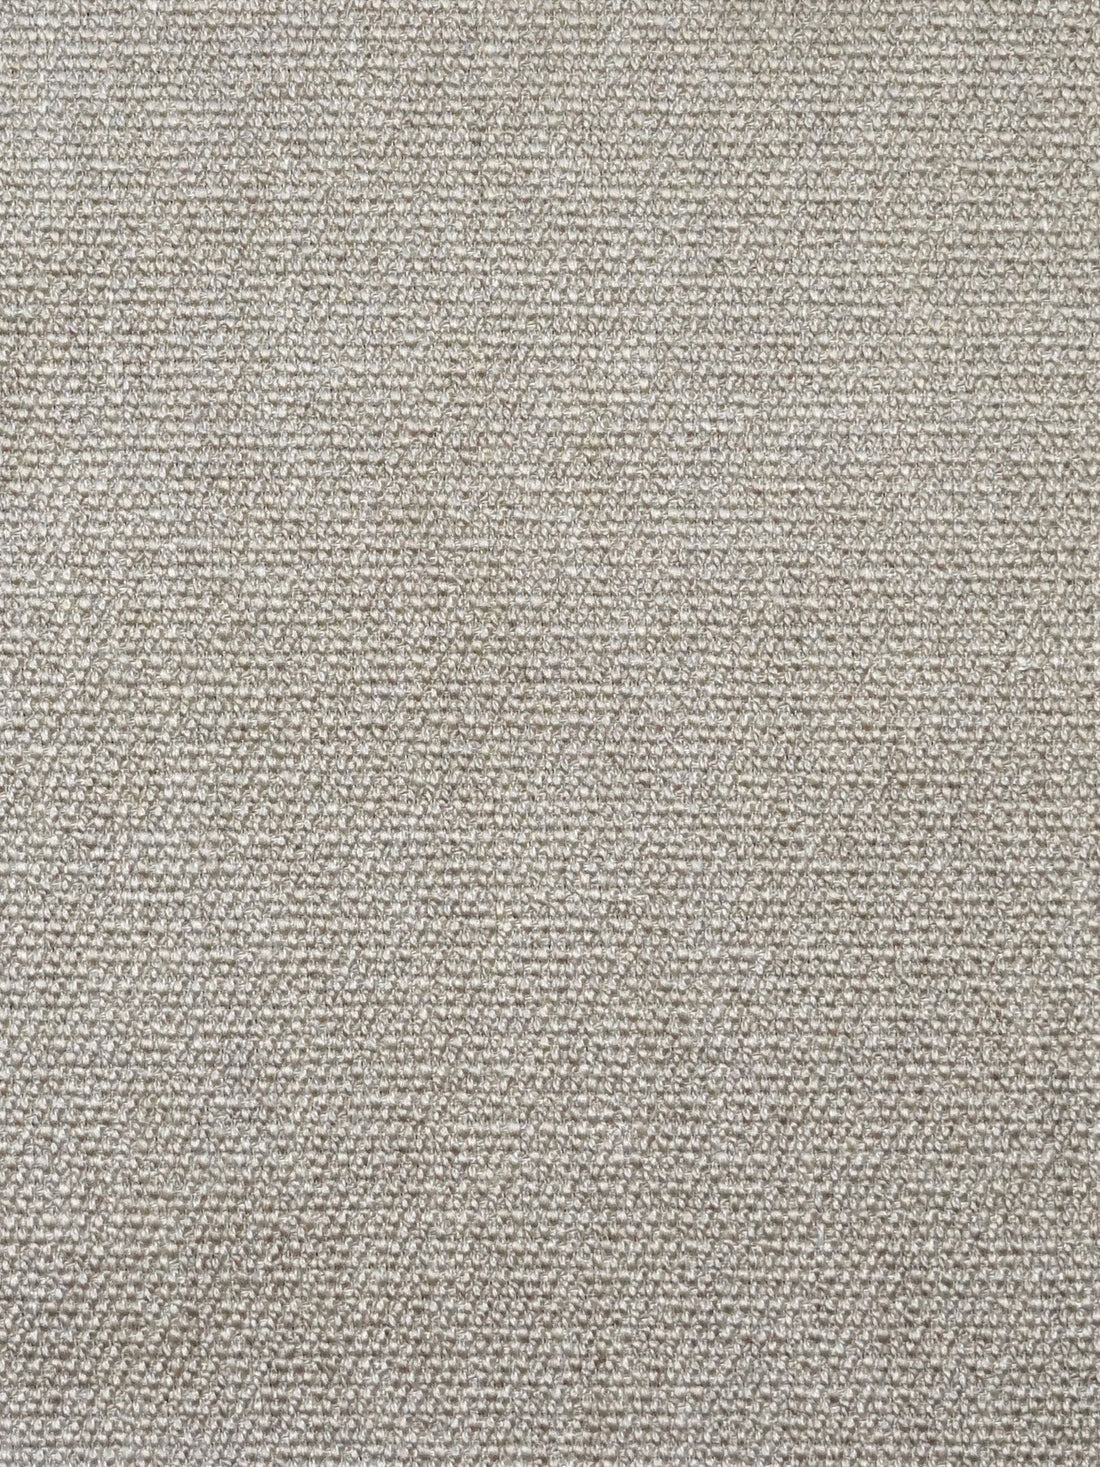 Boss Boucle fabric in flax color - pattern number SC 000227247 - by Scalamandre in the Scalamandre Fabrics Book 1 collection